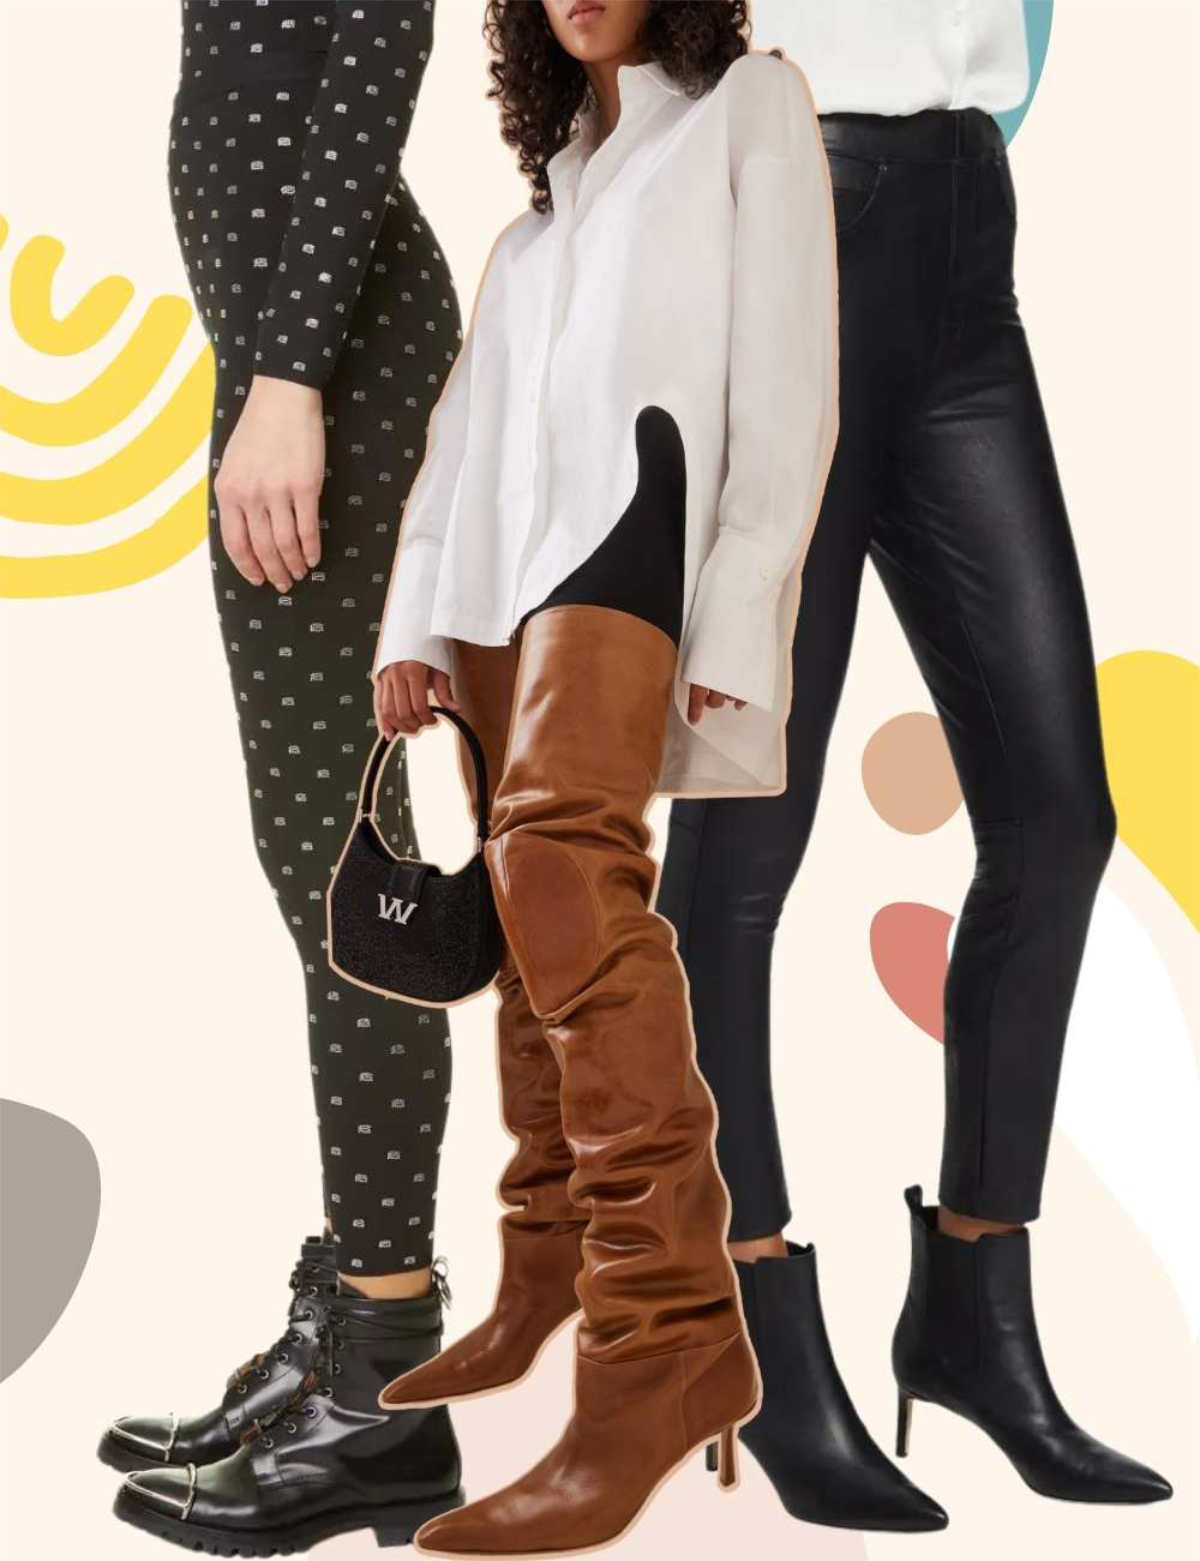 Women's Leggings - Great With Boots! - Boot Barn